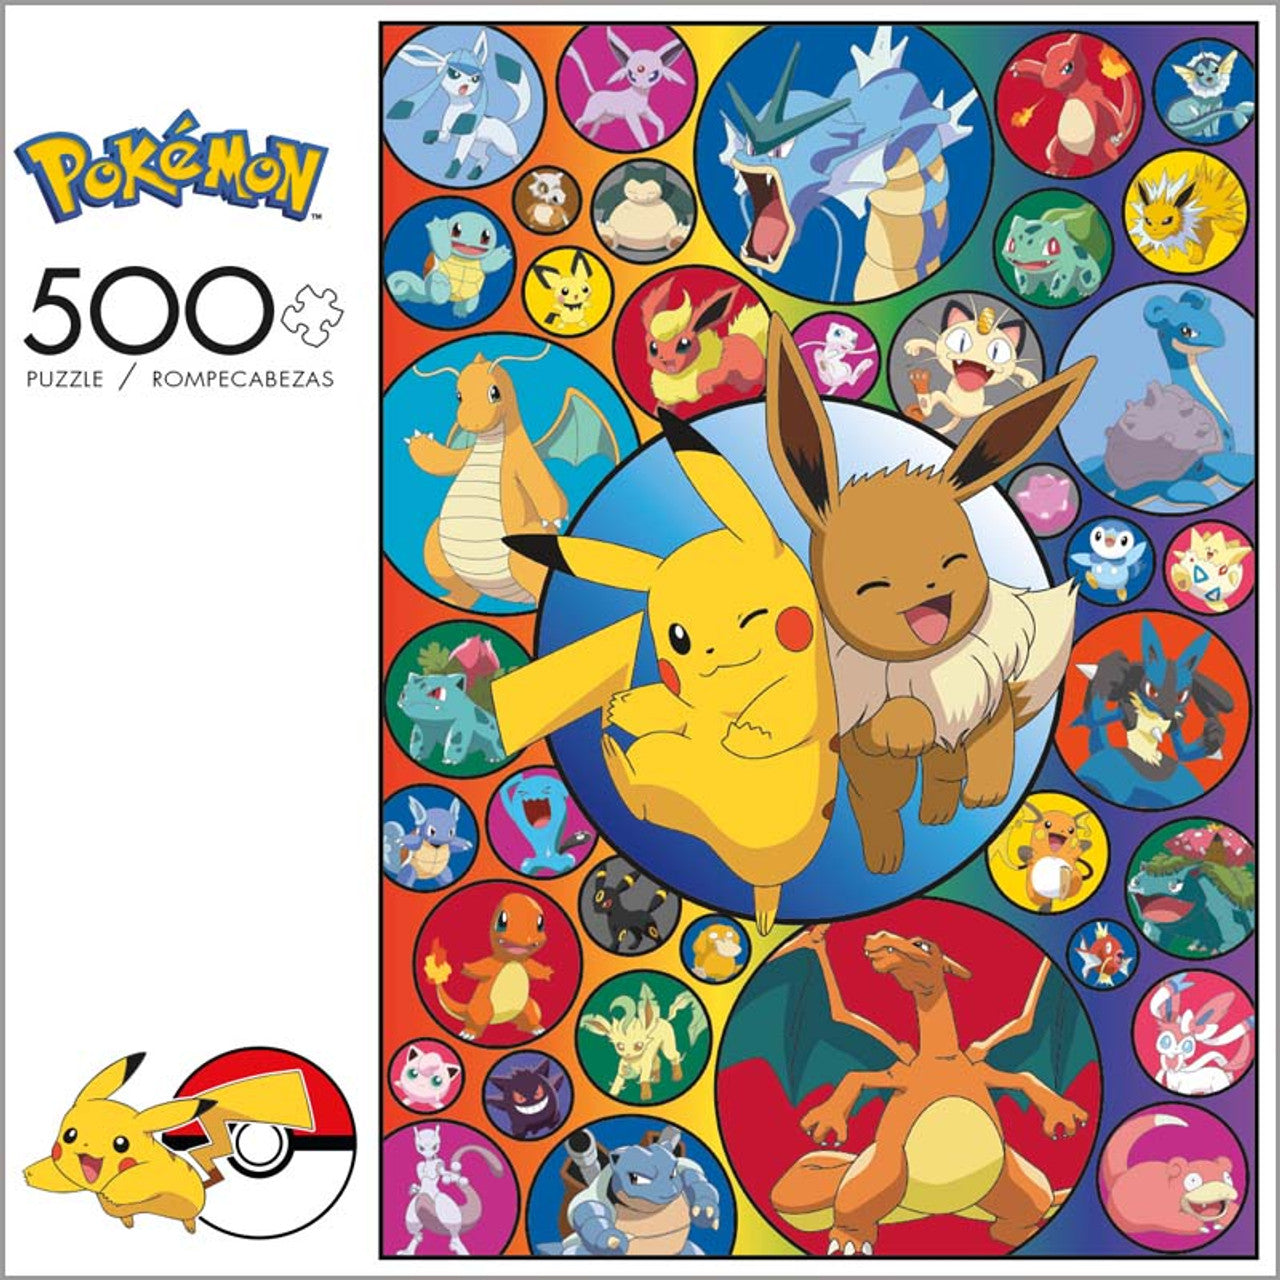 Buffalo Games Pokemon Pikachu and Eevee Puzzle, 100 pc - Kroger